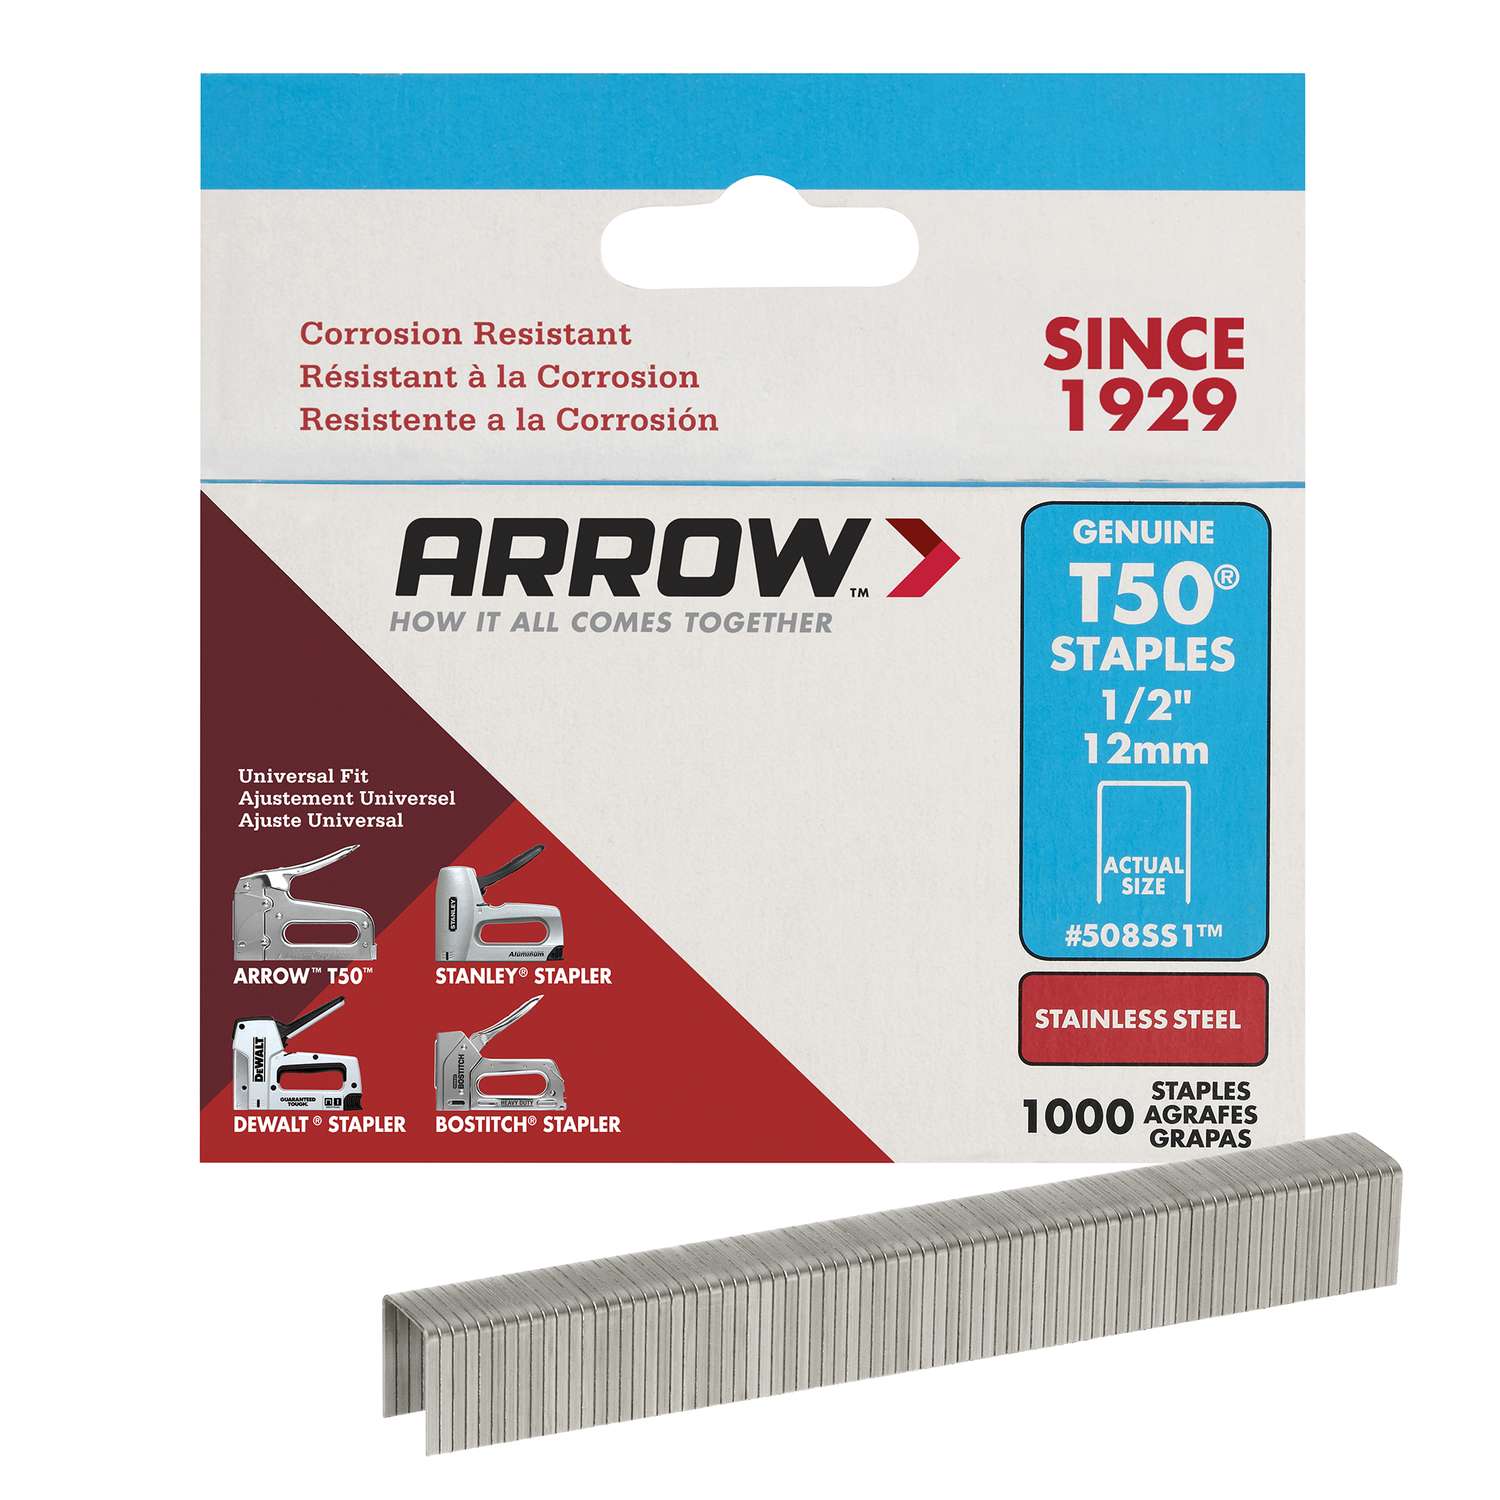 ACE Hardware Heavy Duty Staples 1/2" 12 mm # 22279 Box Count 1000 